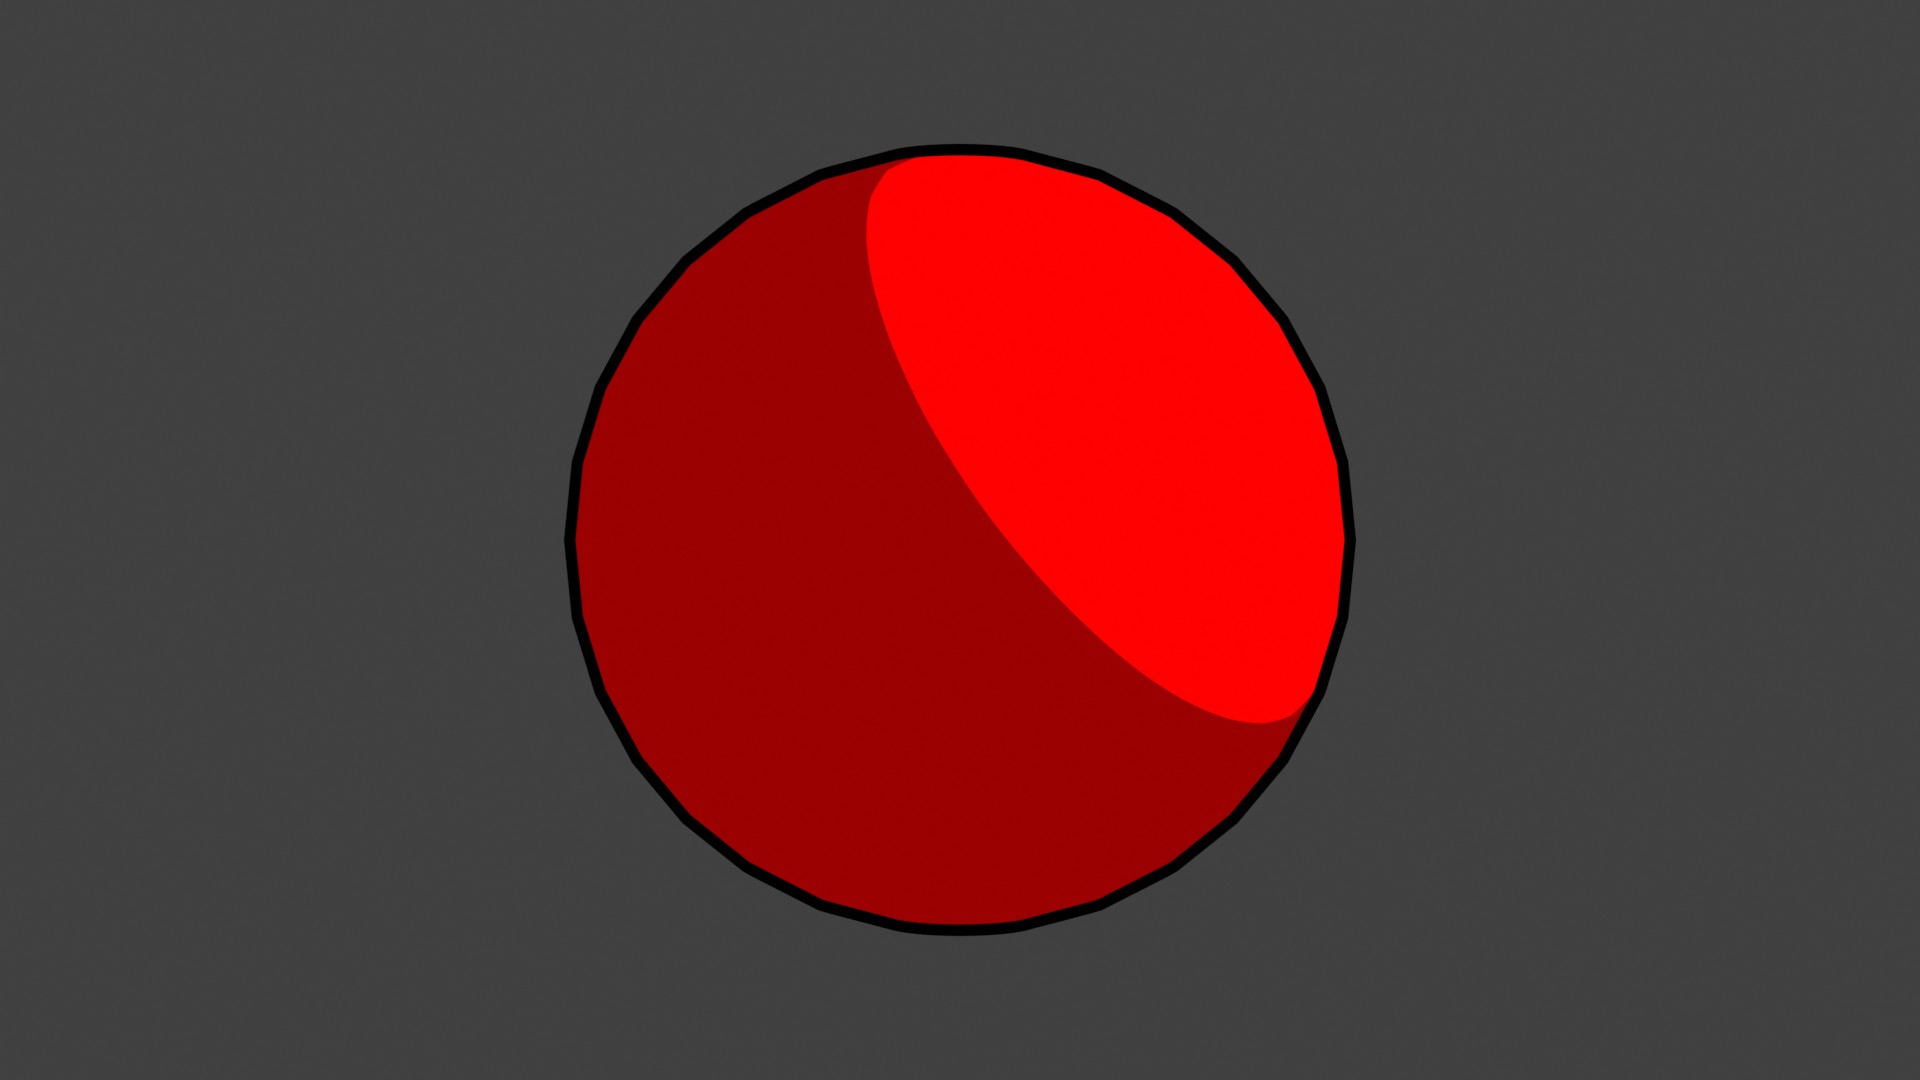 A vibrantly red circle with black outline that's colored as if a light is shining on it from 2 o'clock.